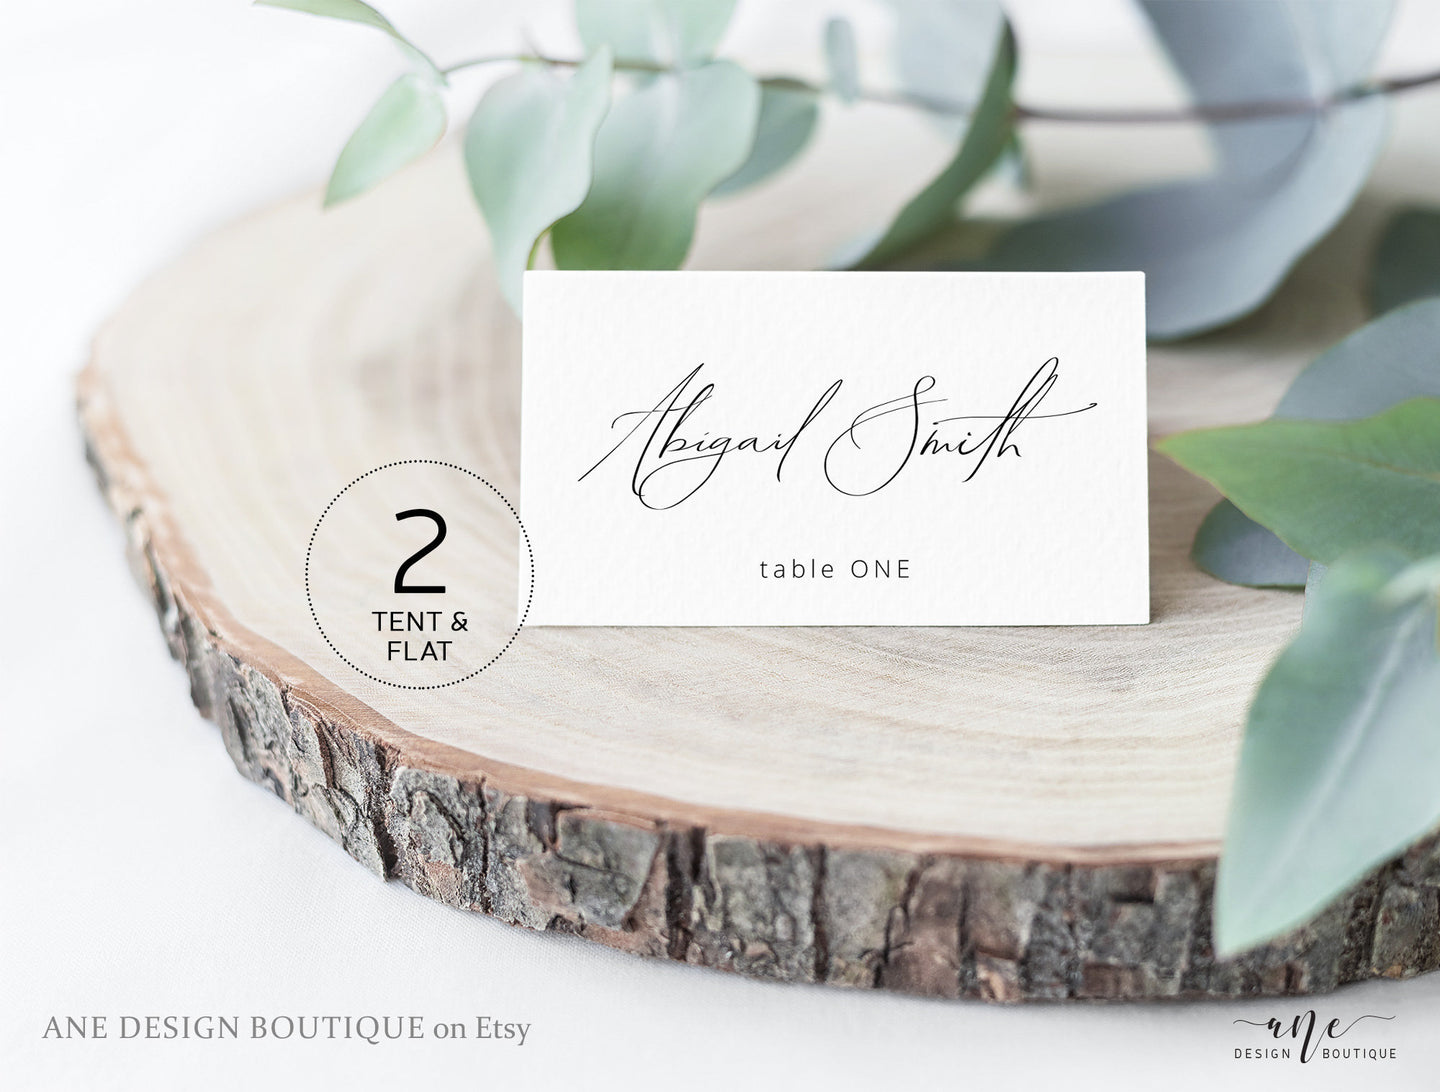 Minimalist Modern Calligraphy Place Card Template, Printable DIY Wedding Bridal Escort Card, 100% Editable Table Name Cards, Download, 011